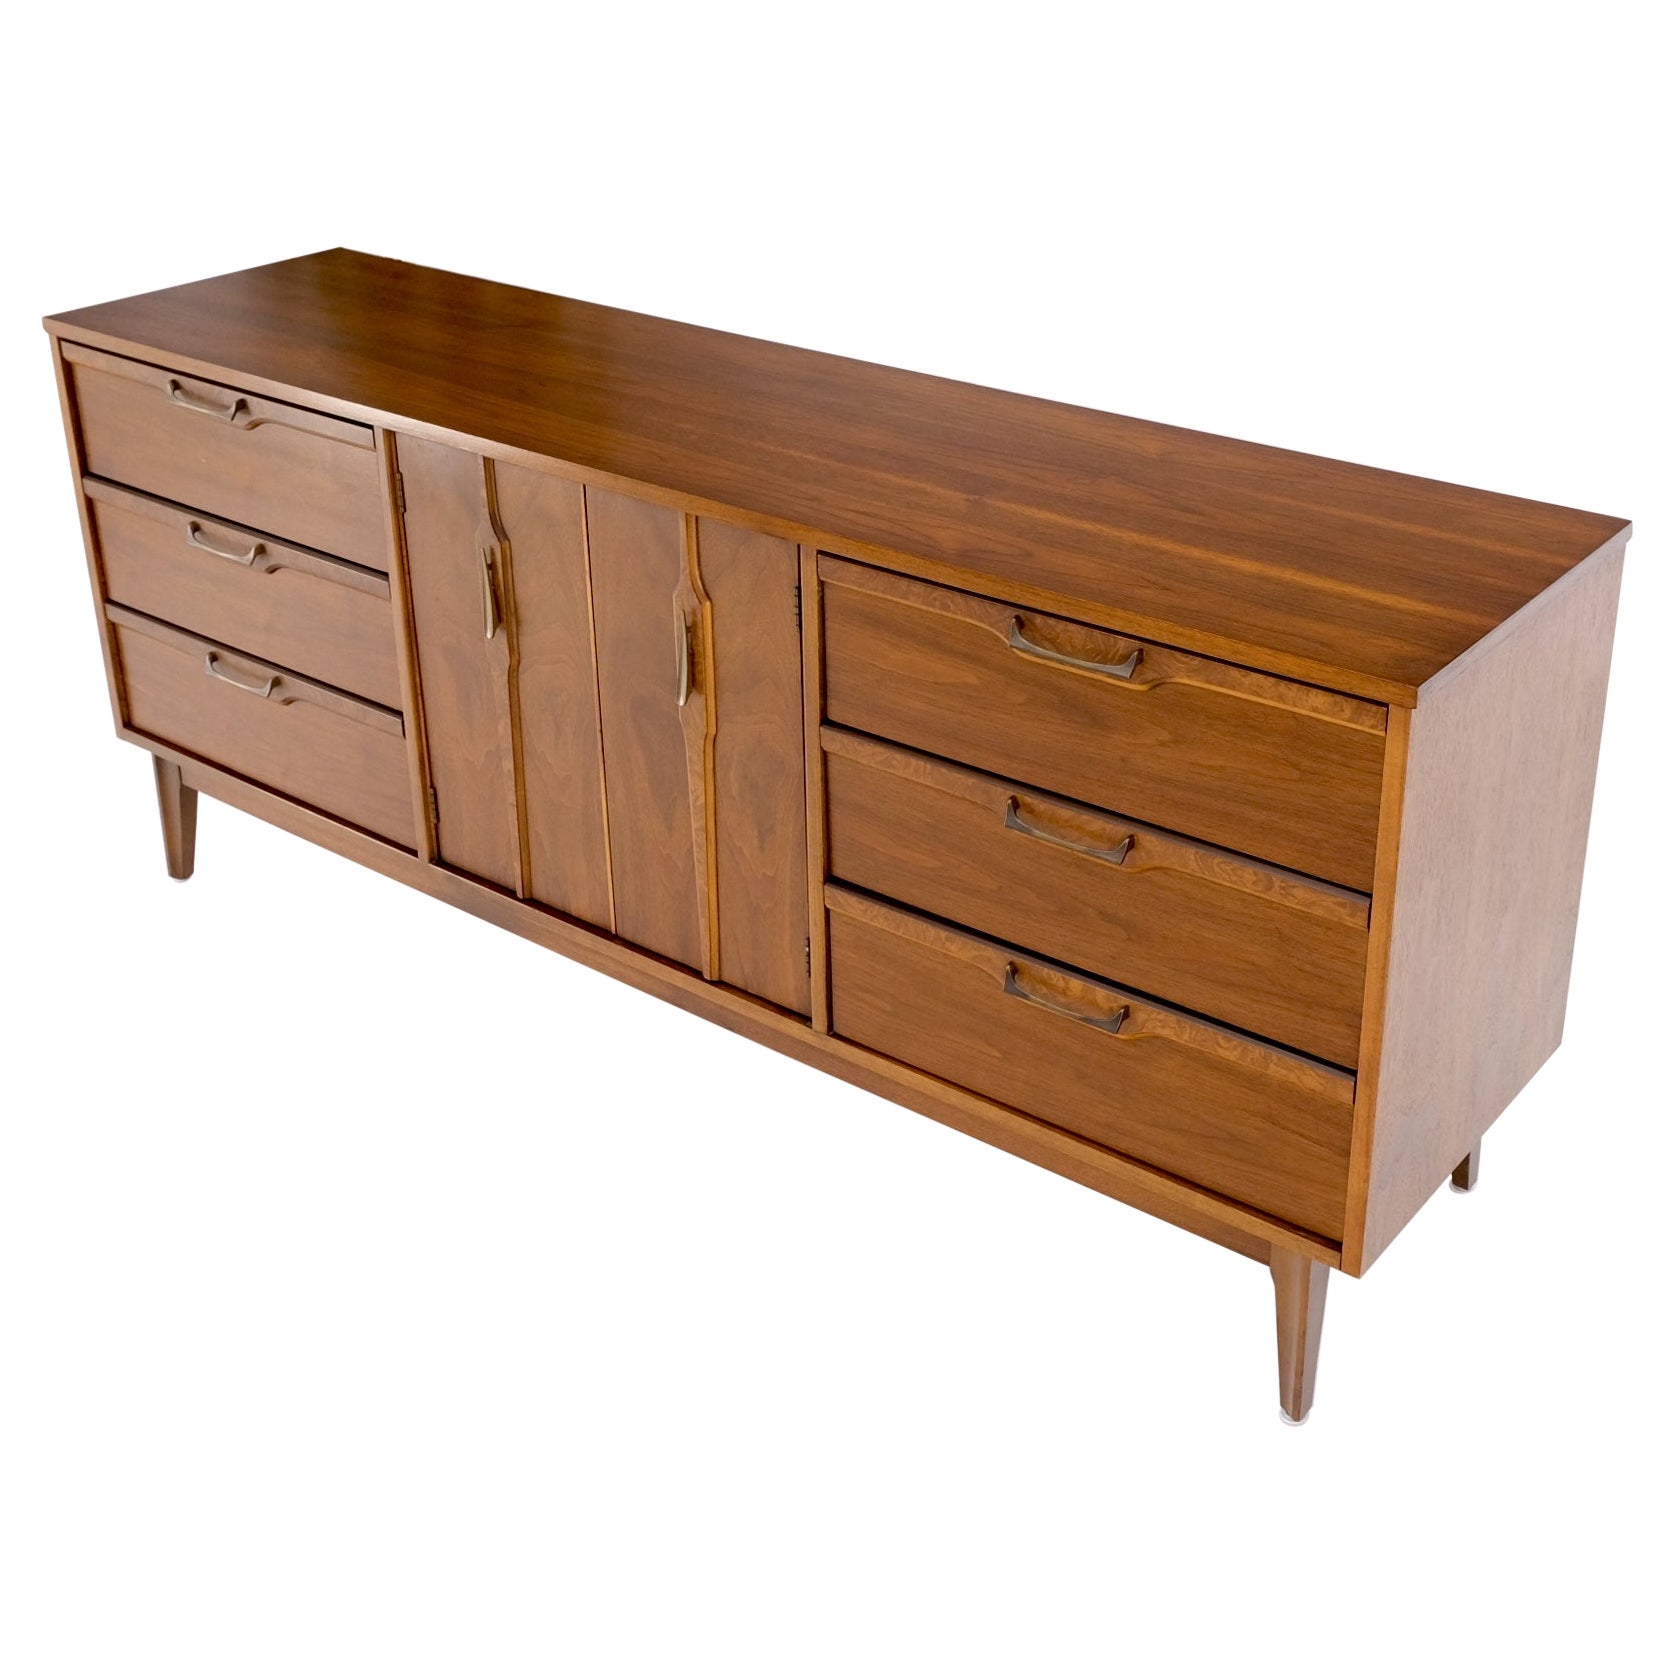 Long Walnut 9 Drawers Two Doors Mid-Century Modern Dresser Credenza Burl Accents